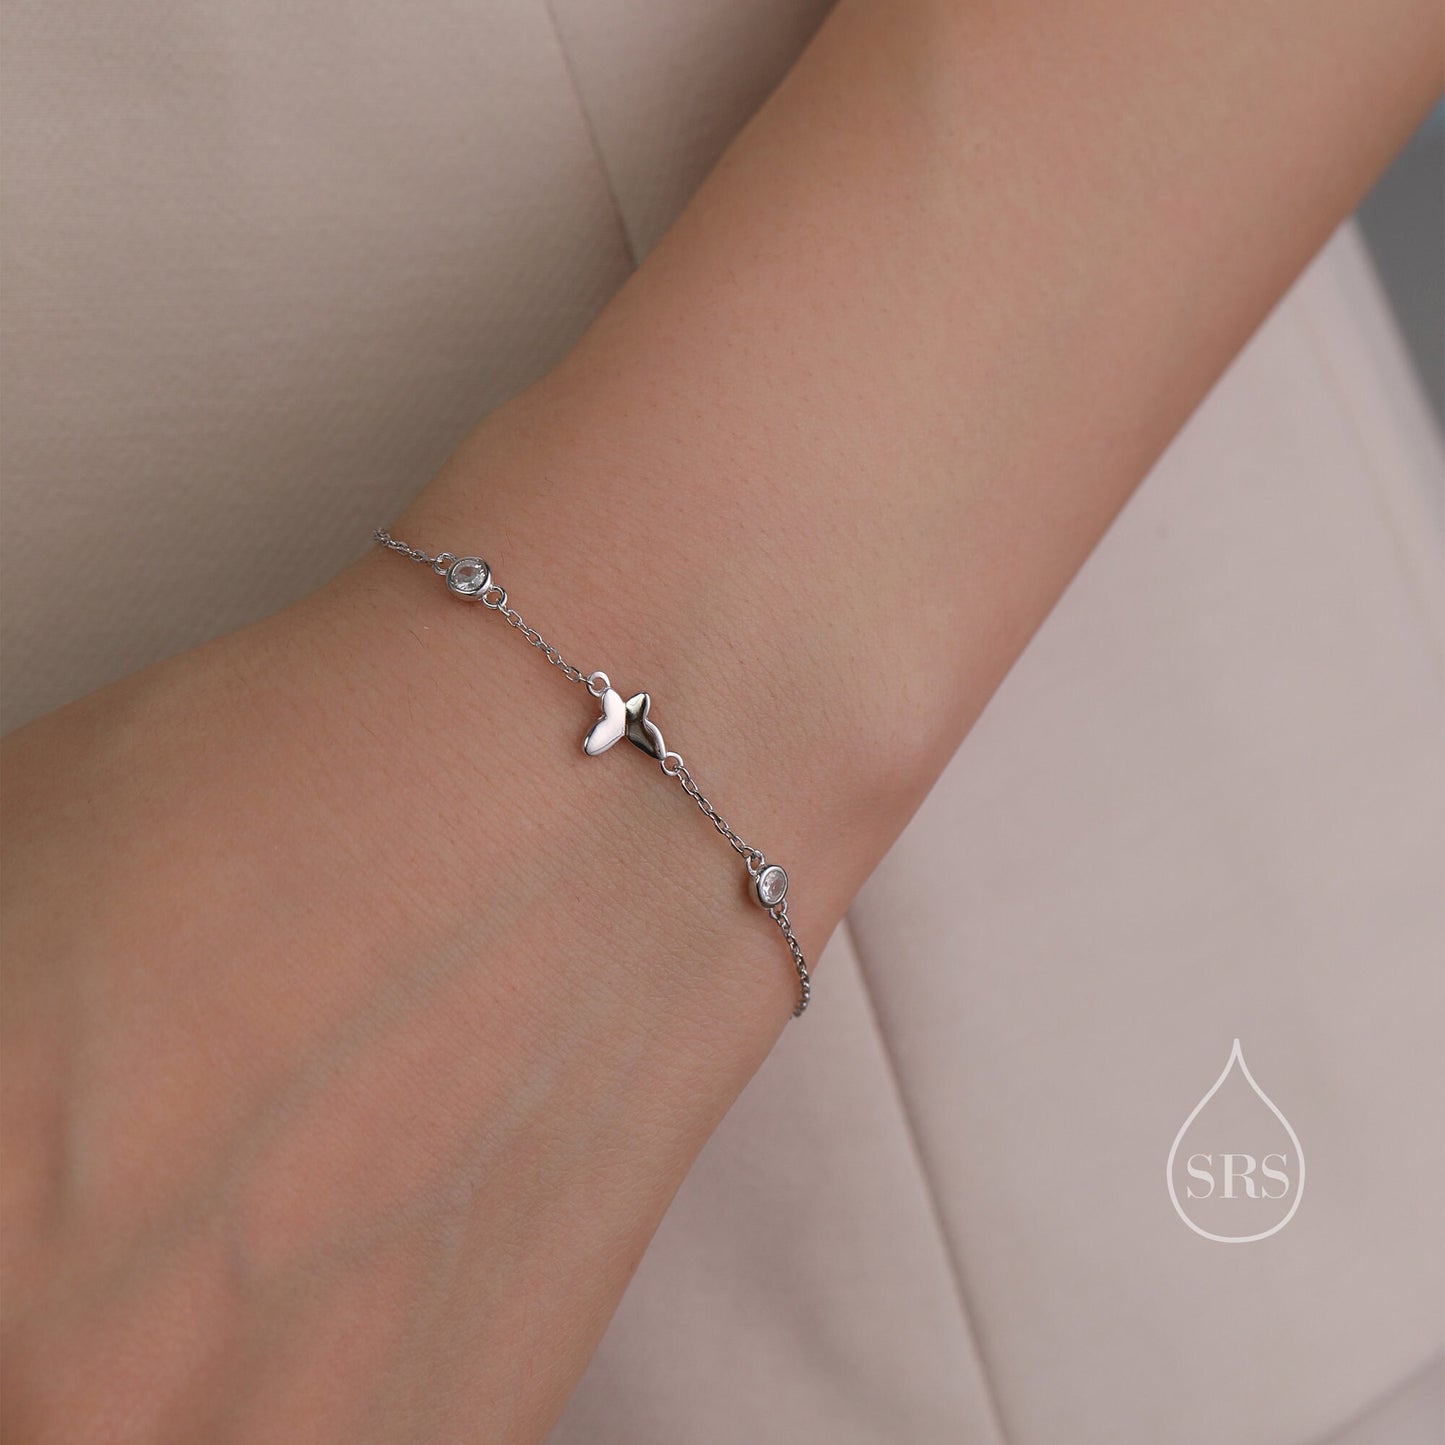 CZ Crystal and Butterfly Floating Bracelet in Sterling Silver, Silver or Gold or Rose gold, Satellite Bracelet, Solid Silver Bracelet